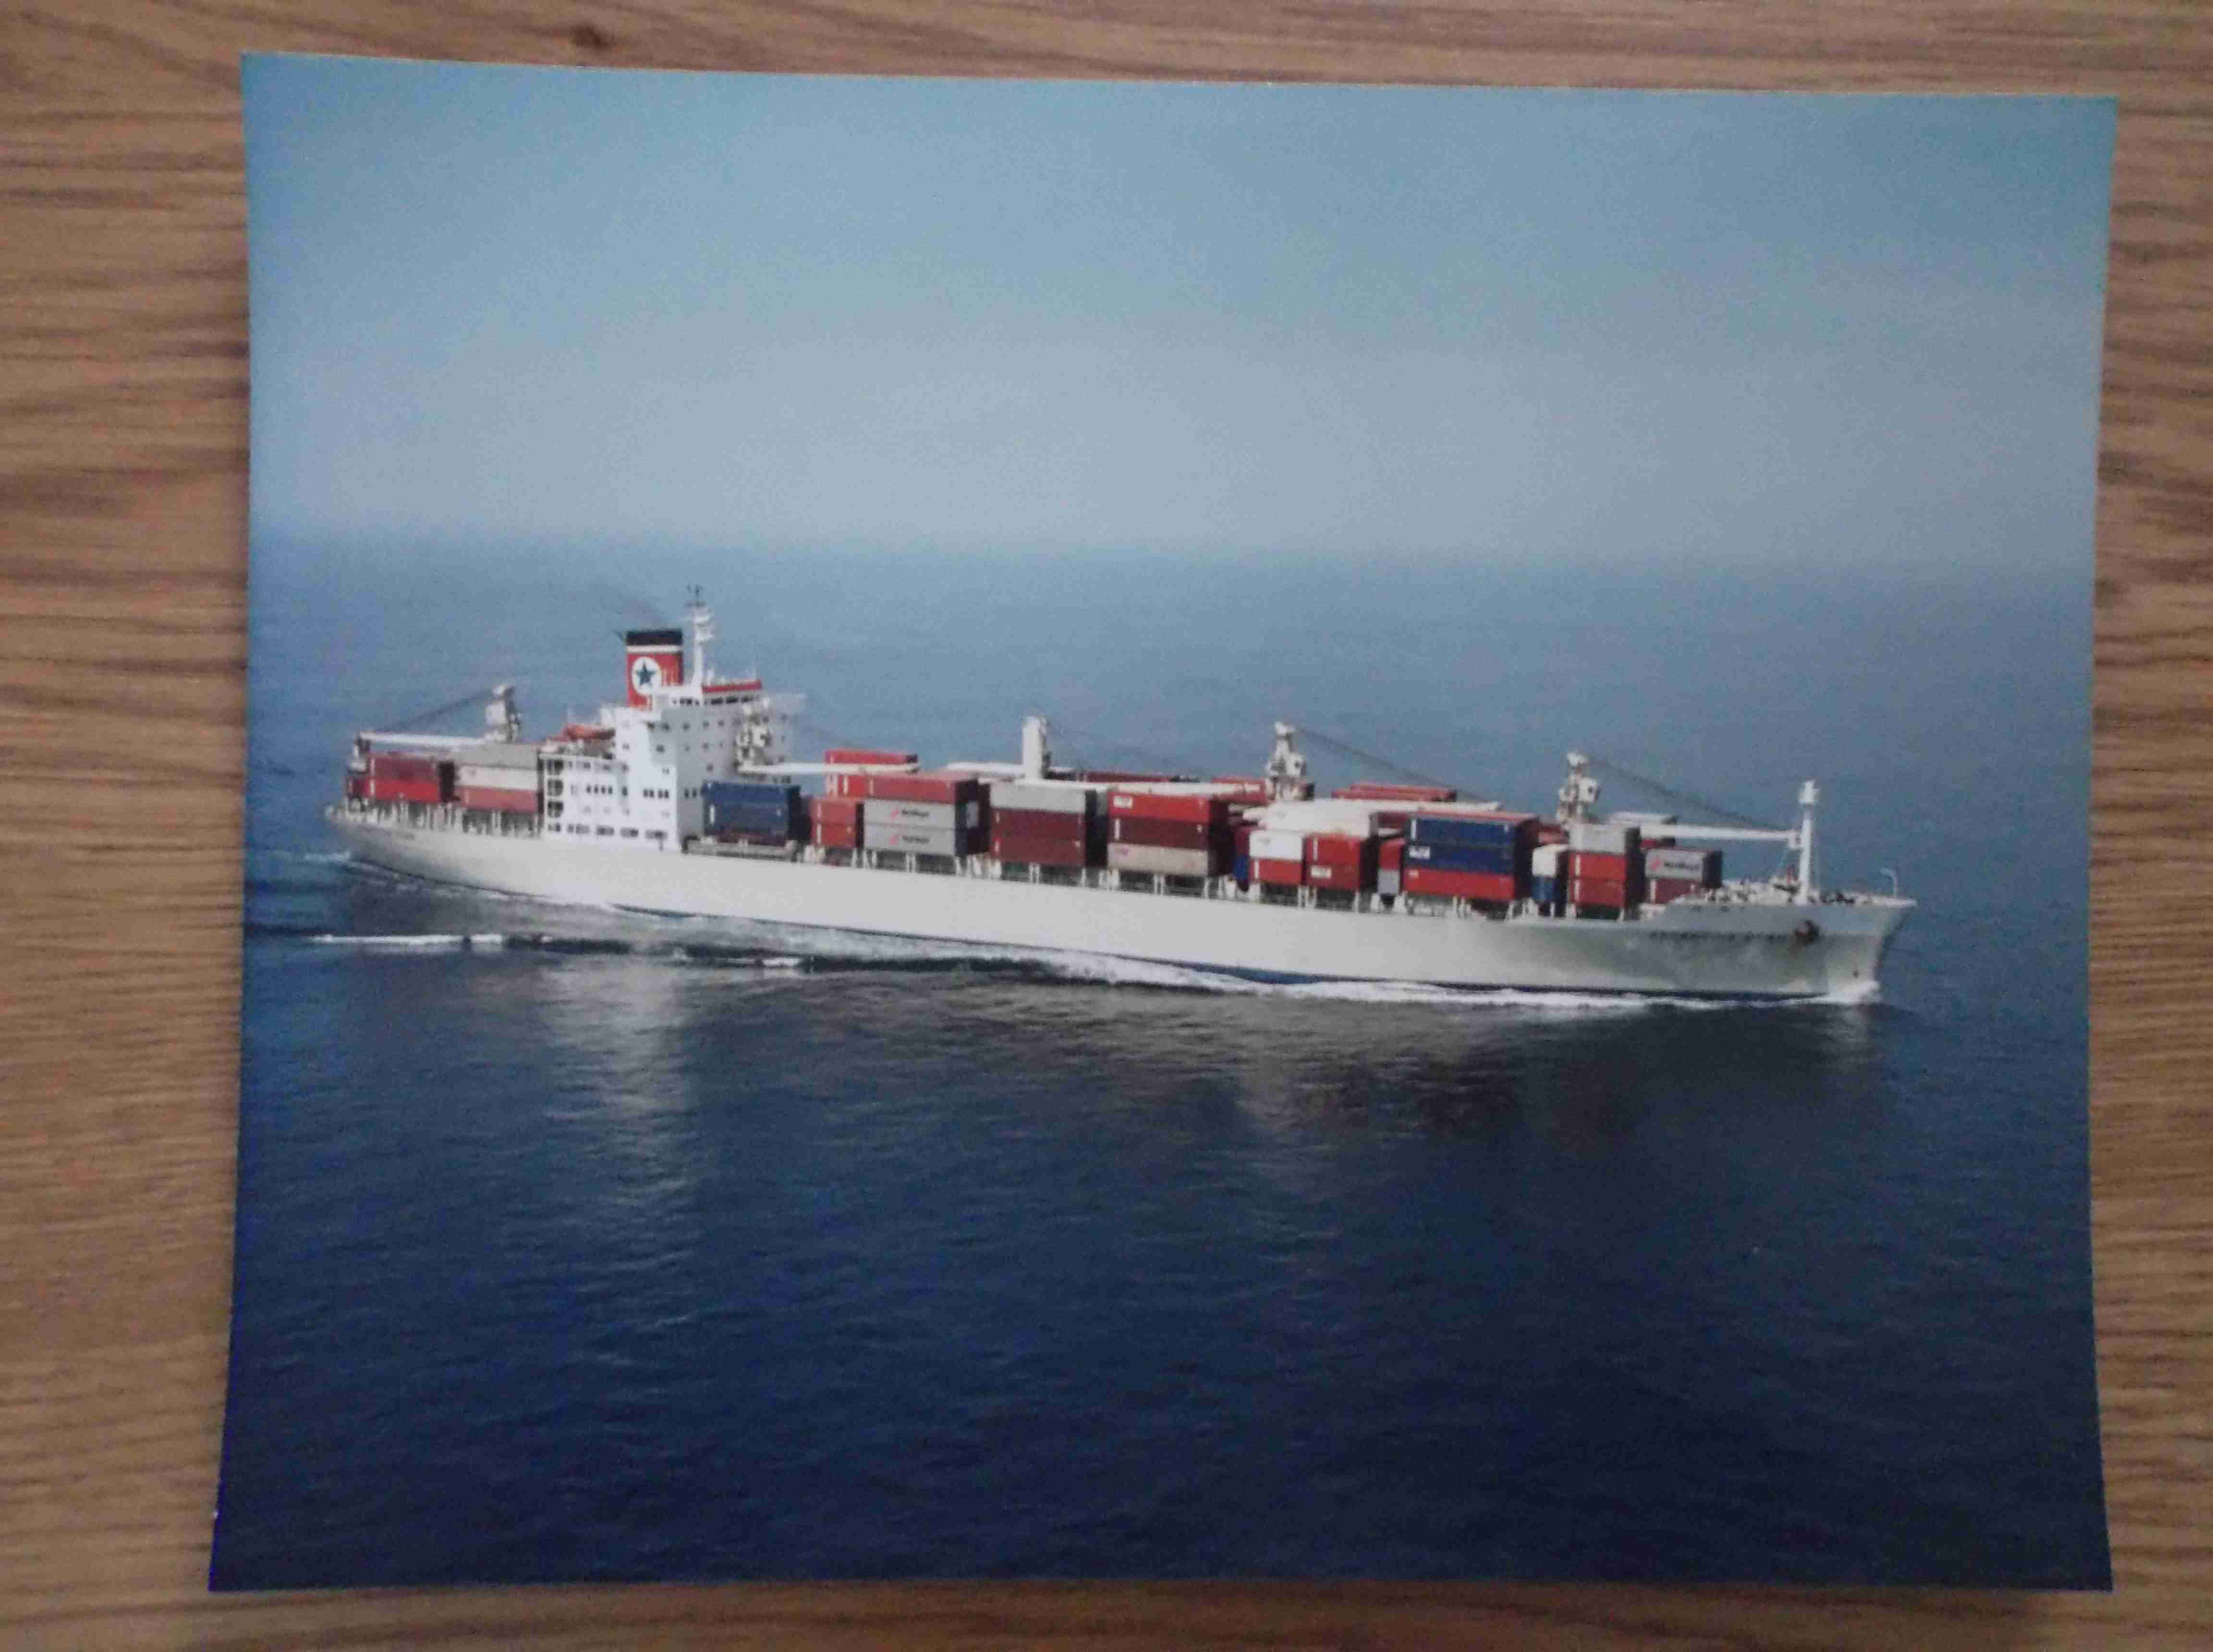 LARGE COLOUR PHOTOGRAPH OF THE BLUE STAR LINE VESSEL THE ARGENTINA STAR